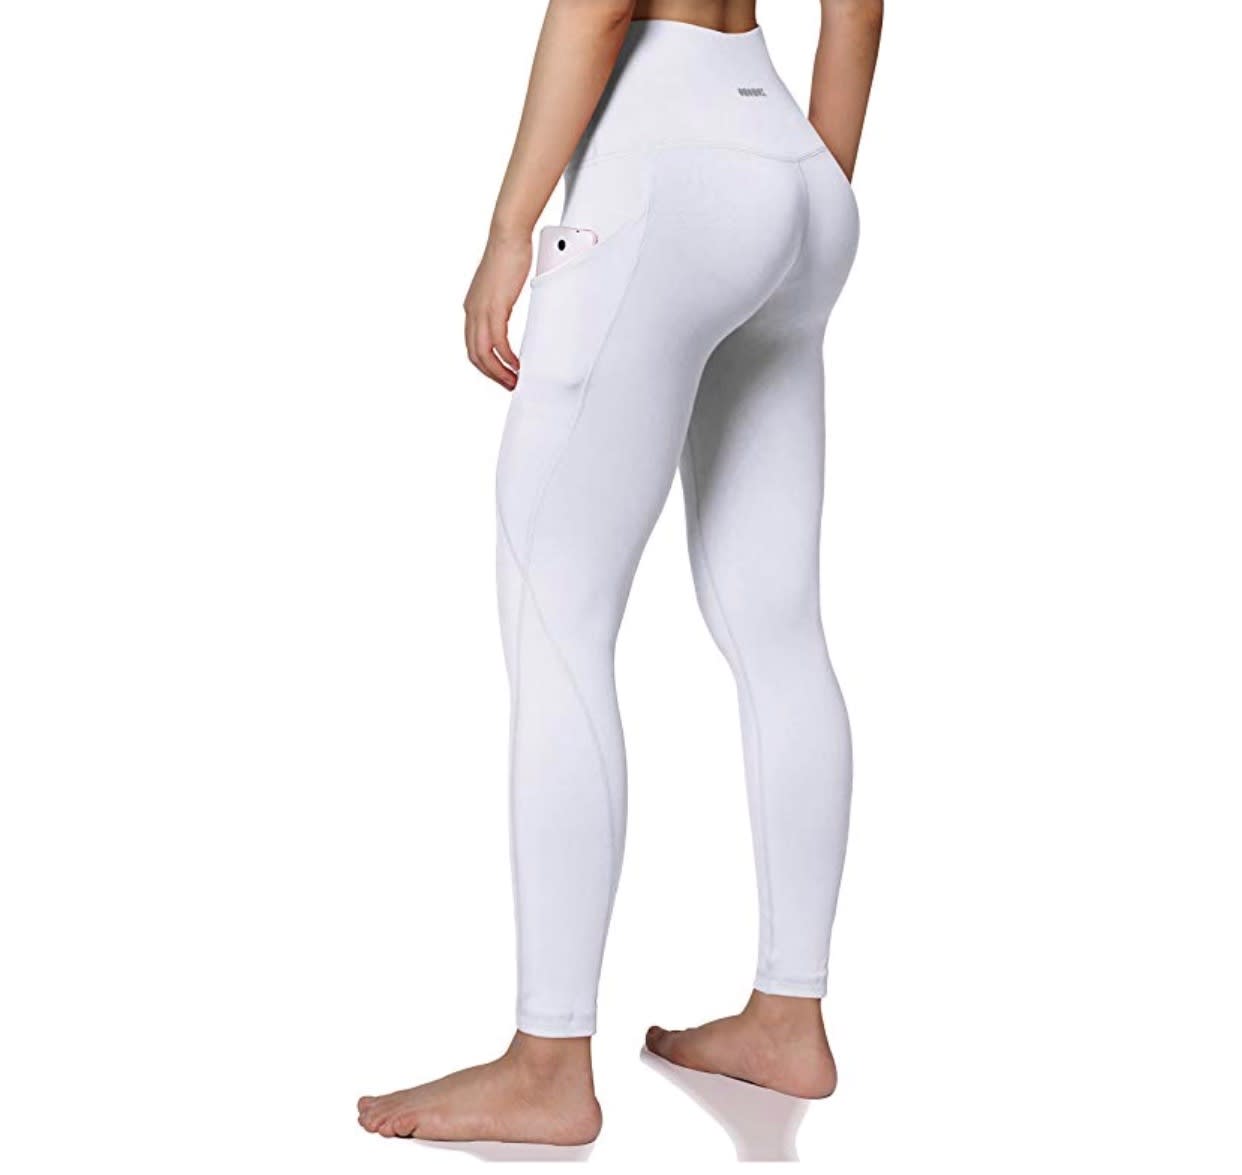 These bestselling 'tummy control' leggings are $22 right now